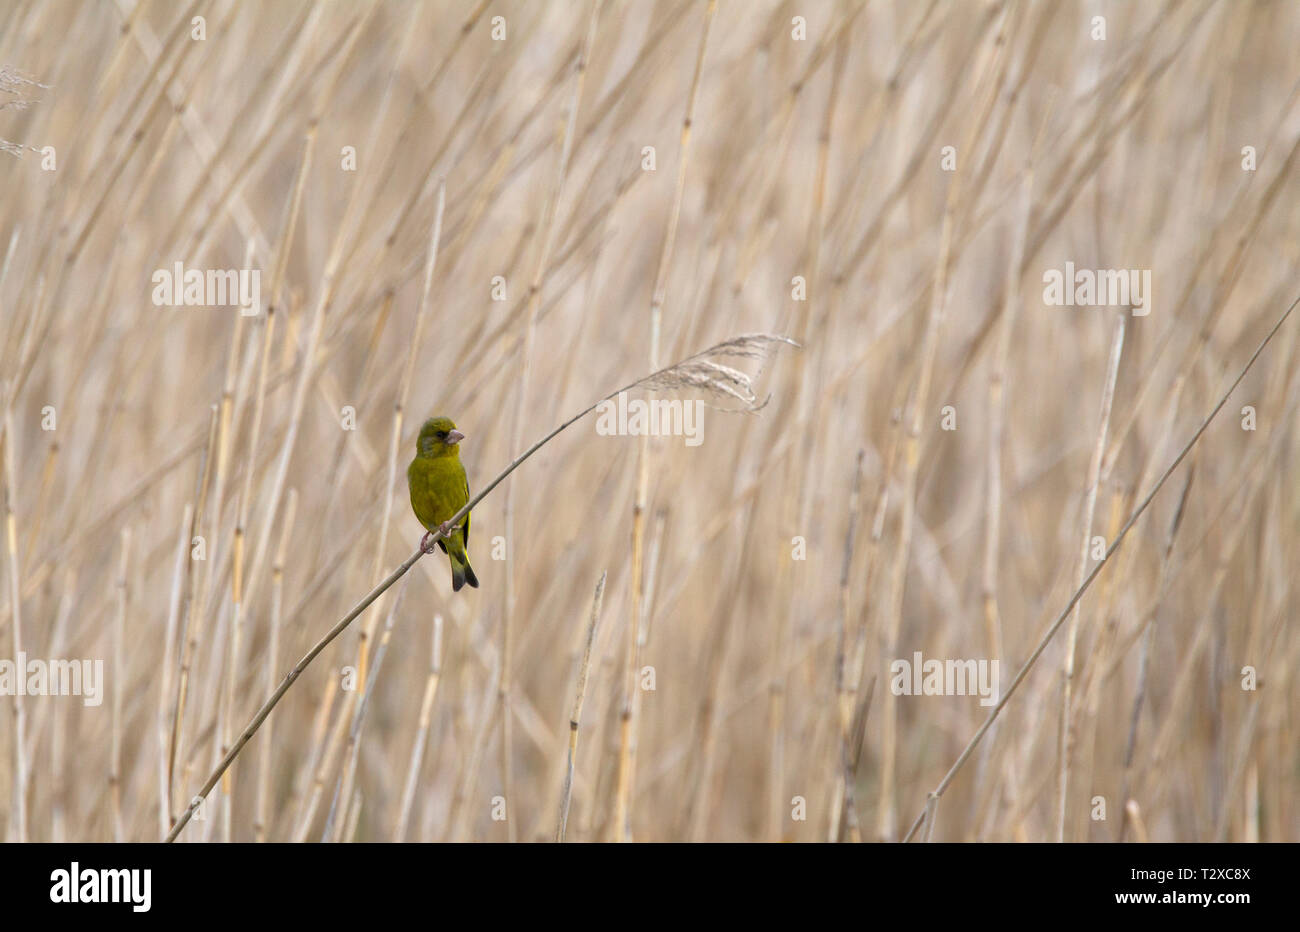 Greenfinch, Carduelis chloris, single adult male perched in reed bed.  Taken June. Pennington, Hampshire, UK. Stock Photo